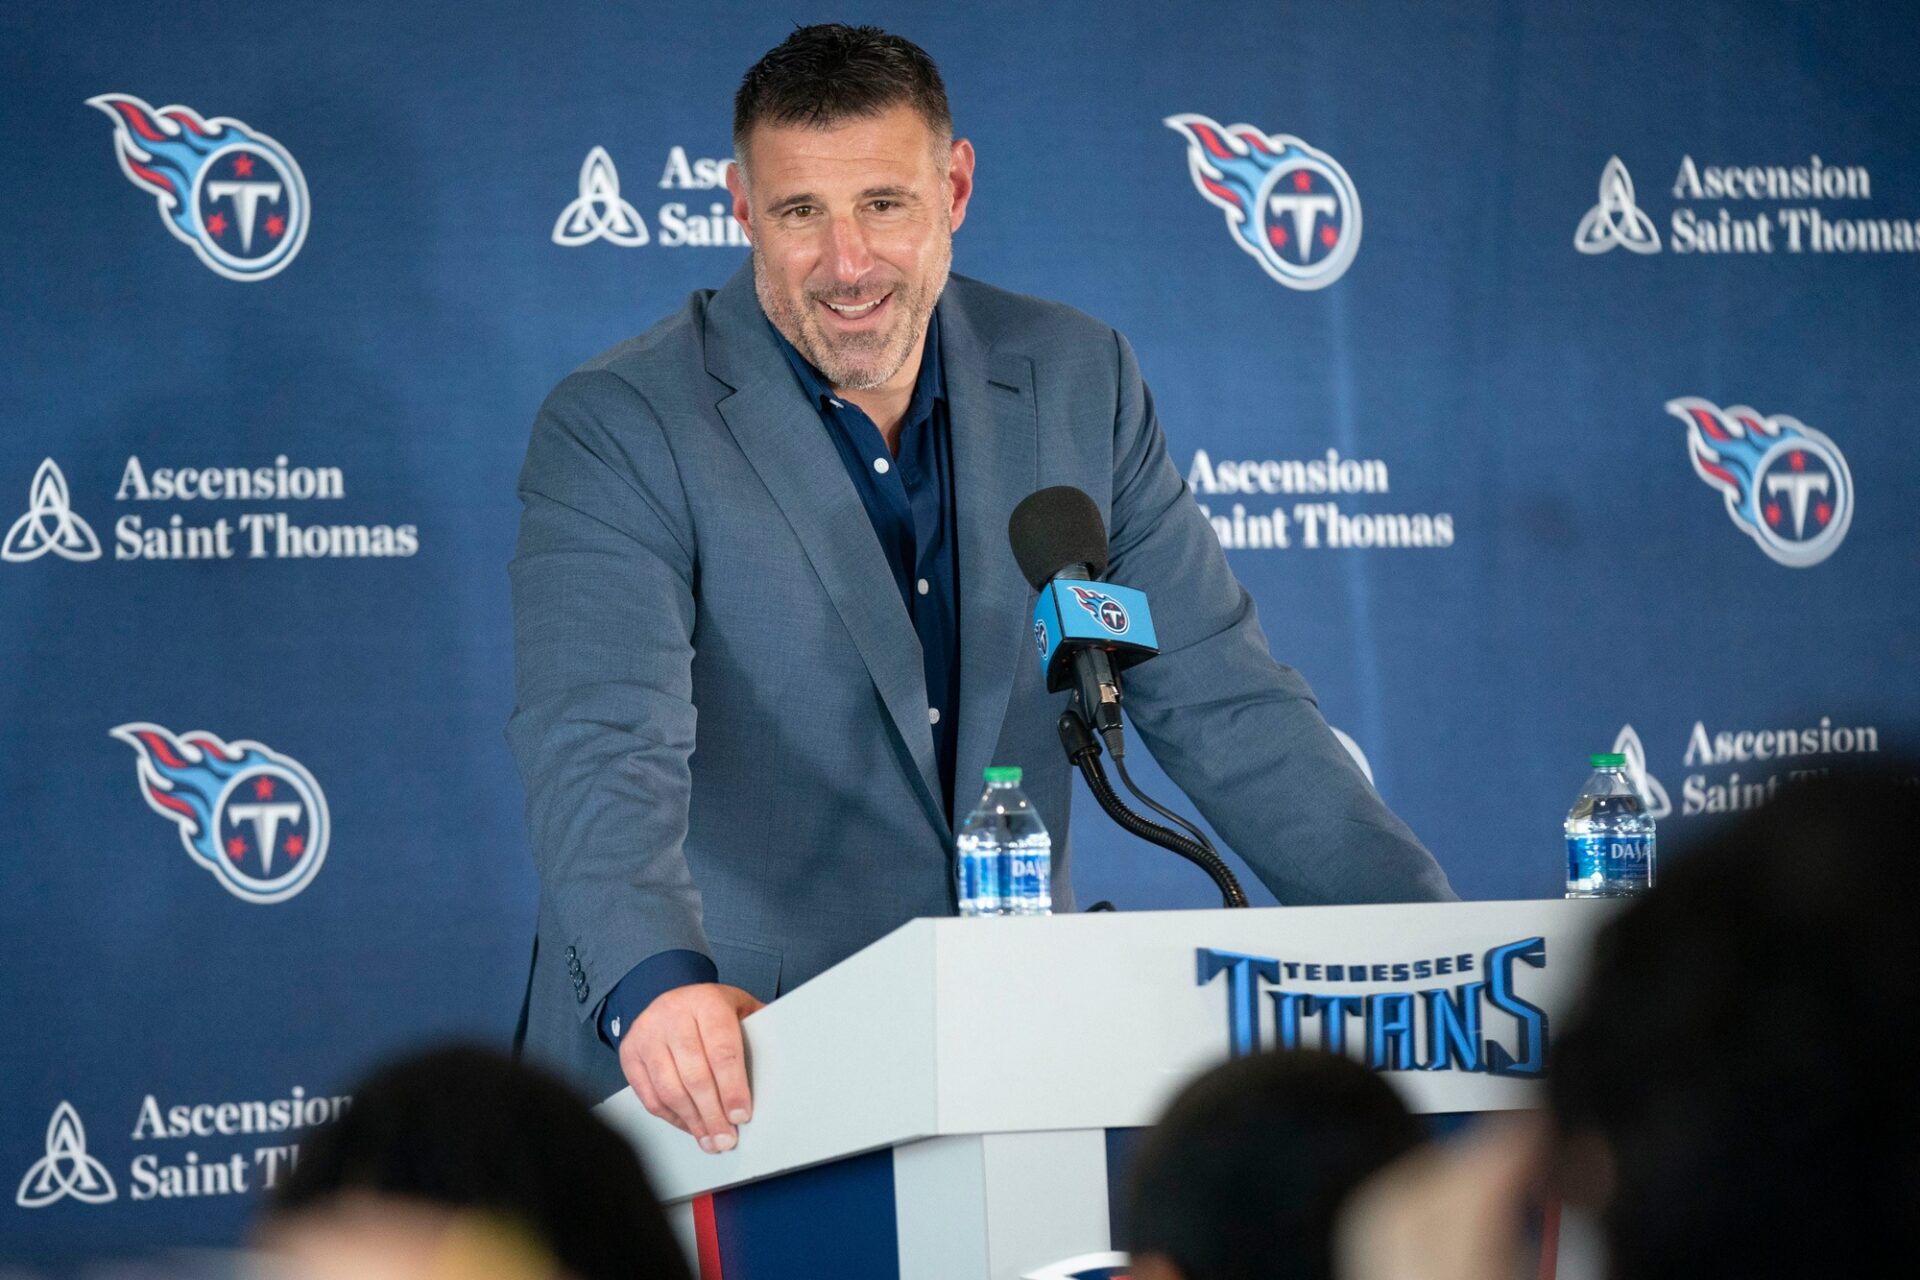 Mike Vrabel responds to questions during a press conference.